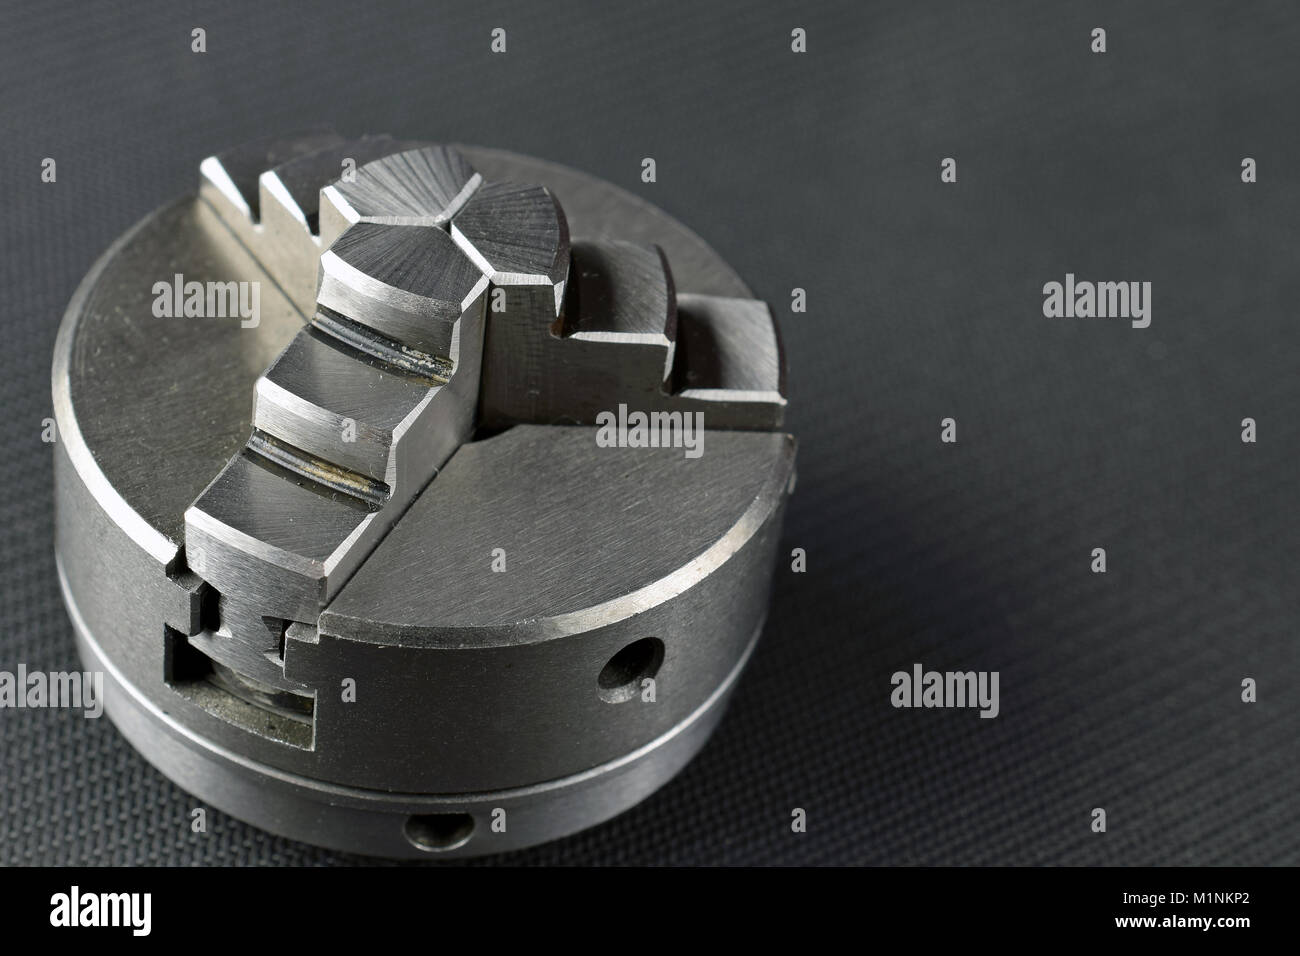 Chuck for metal lathe on dark background. Space for text. Stock Photo